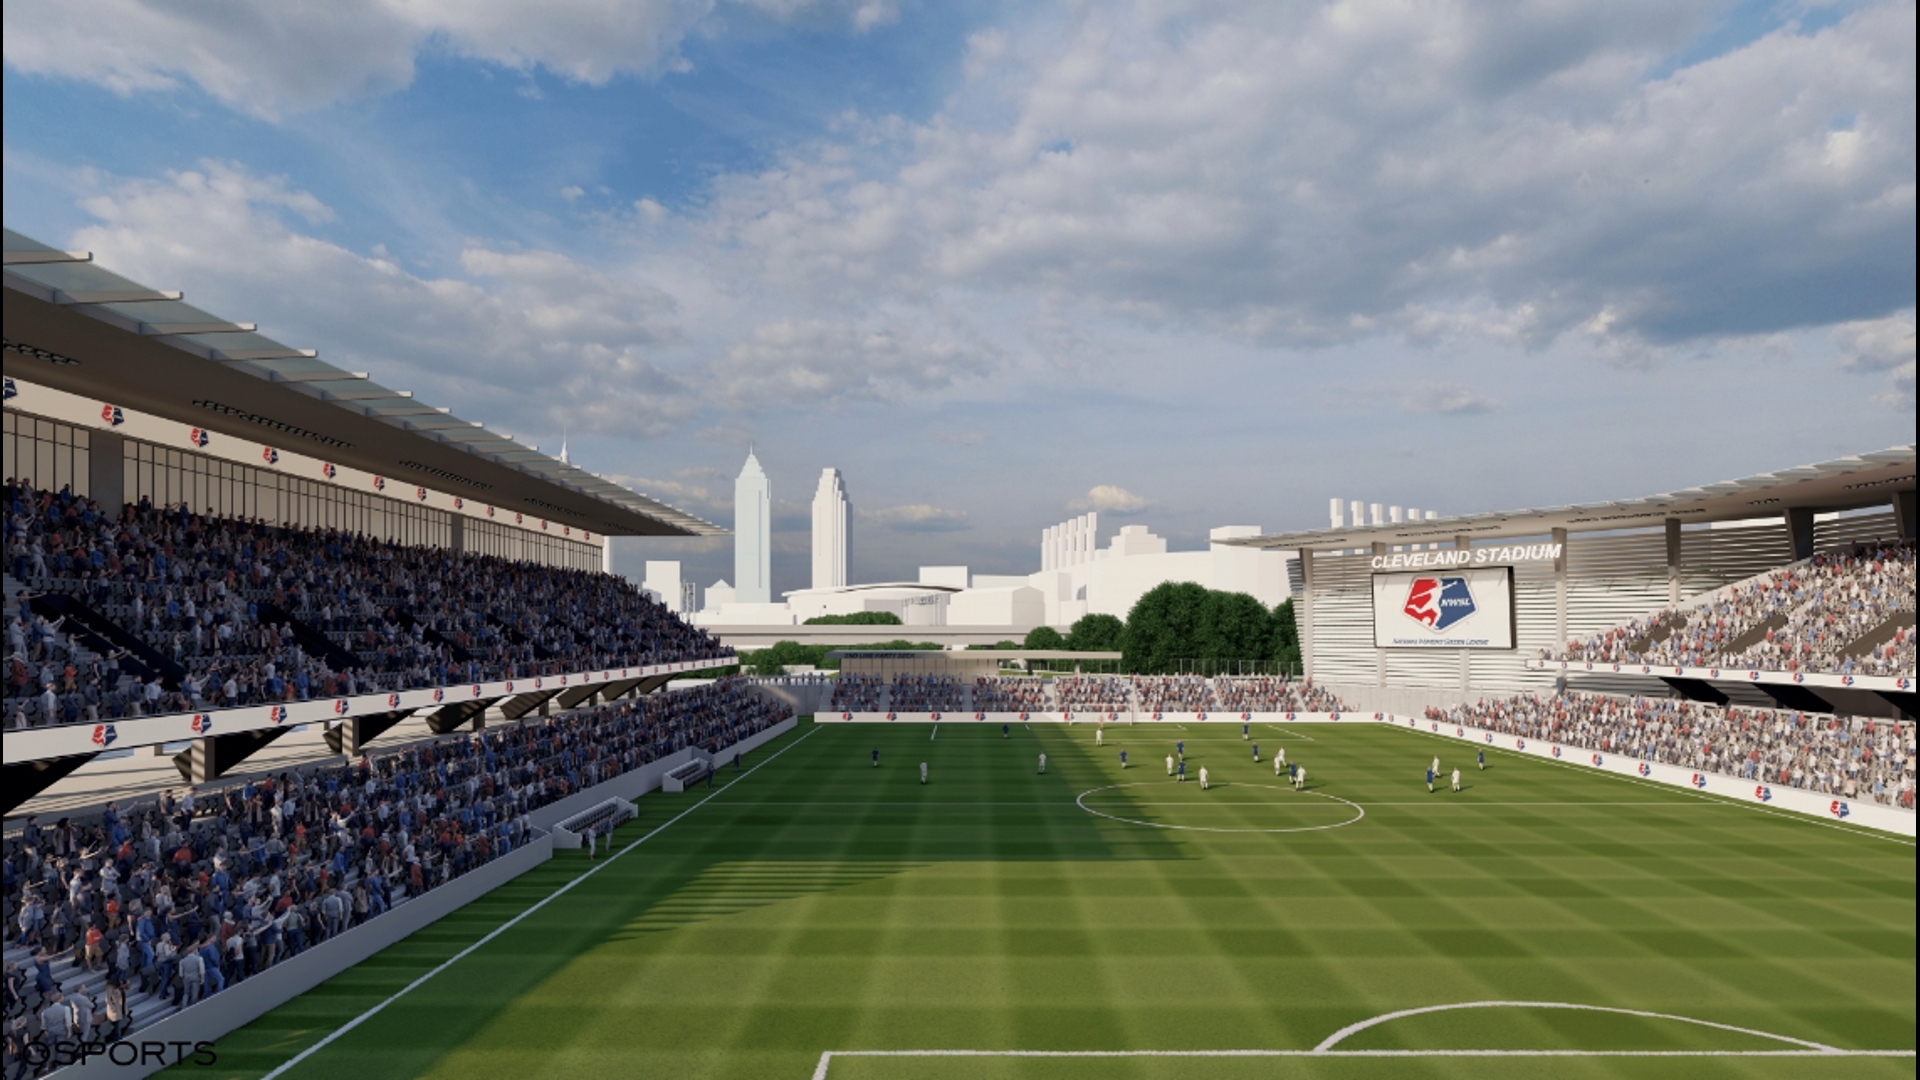 Cleveland Soccer Group released a video showing renderings of its proposal for a downtown stadium that it hopes would host a National Women's Soccer League team.